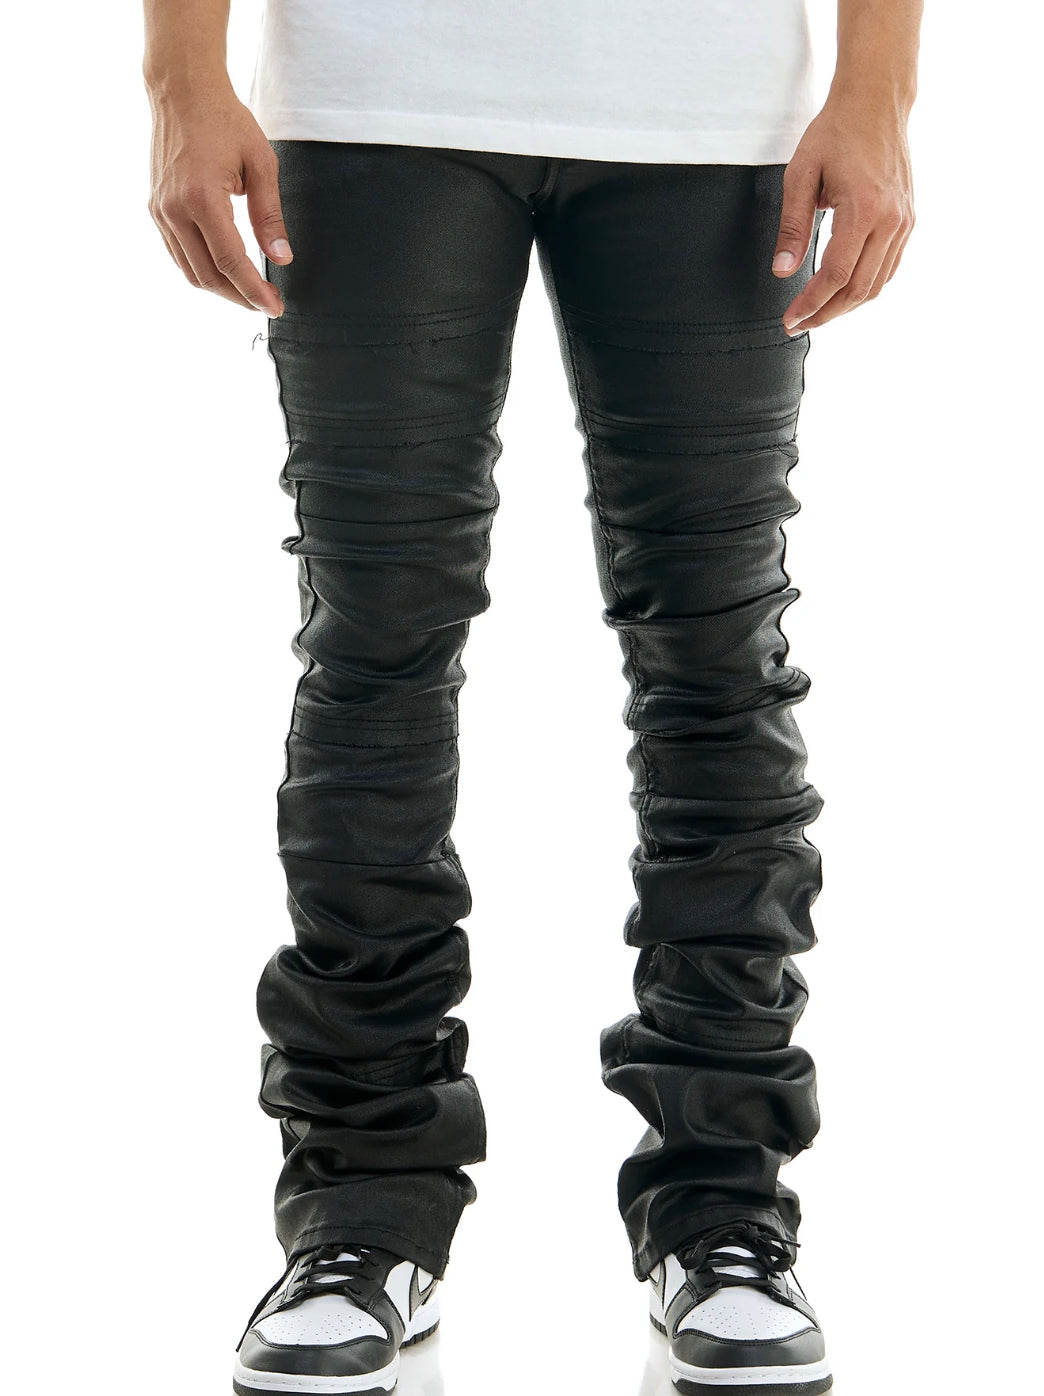 “NEW” KDNK Super Stacked Waxed Black Pants